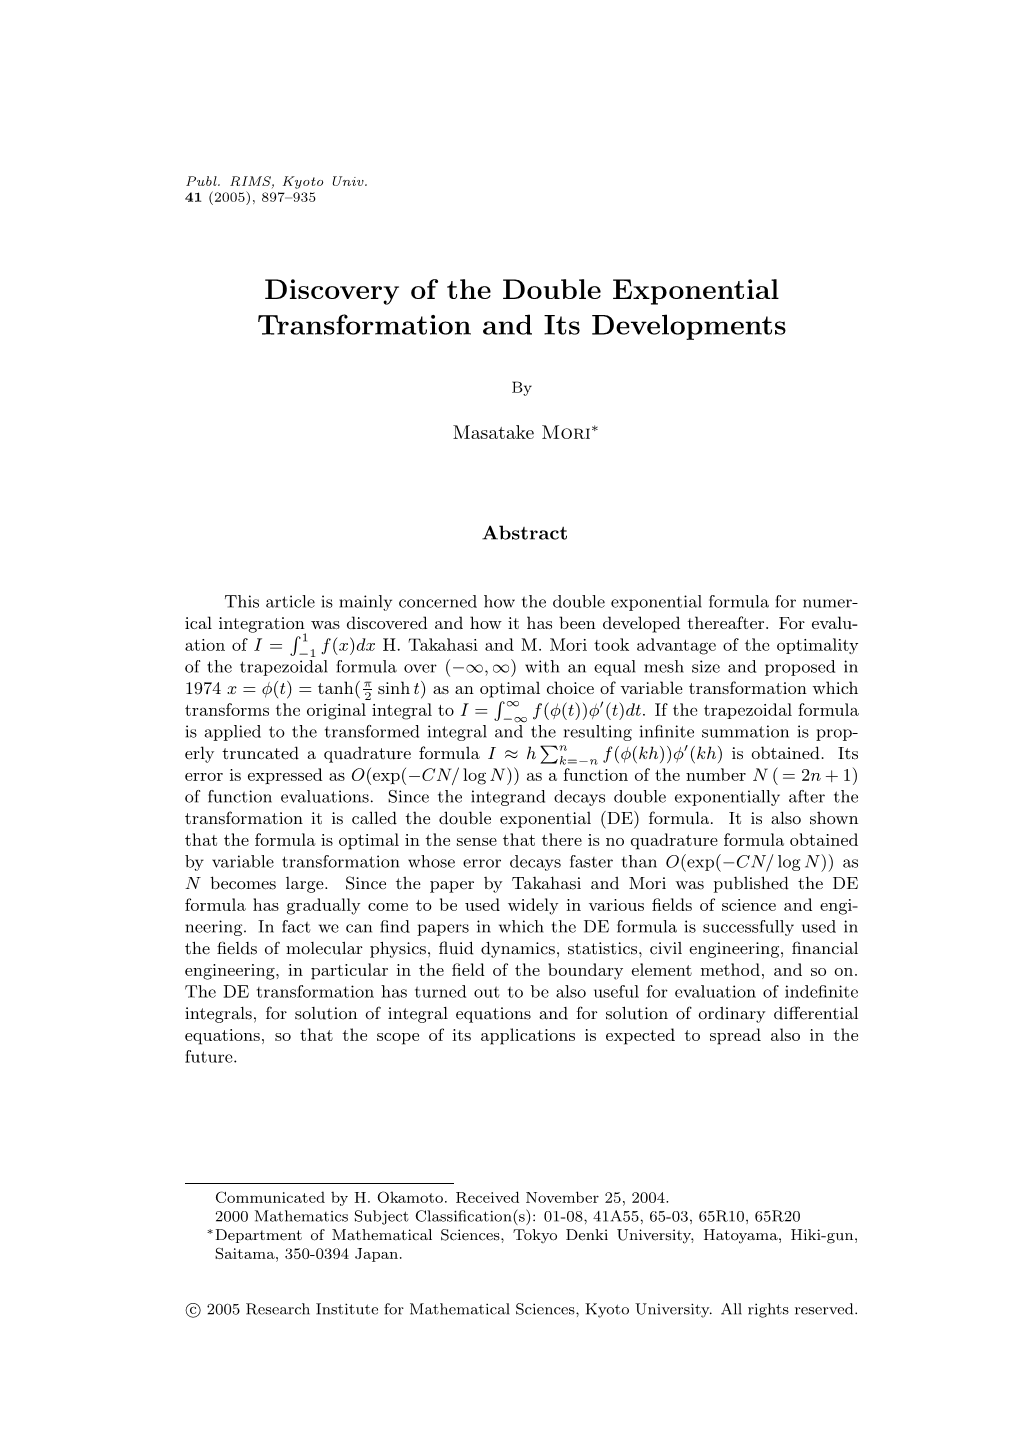 Discovery of the Double Exponential Transformation and Its Developments